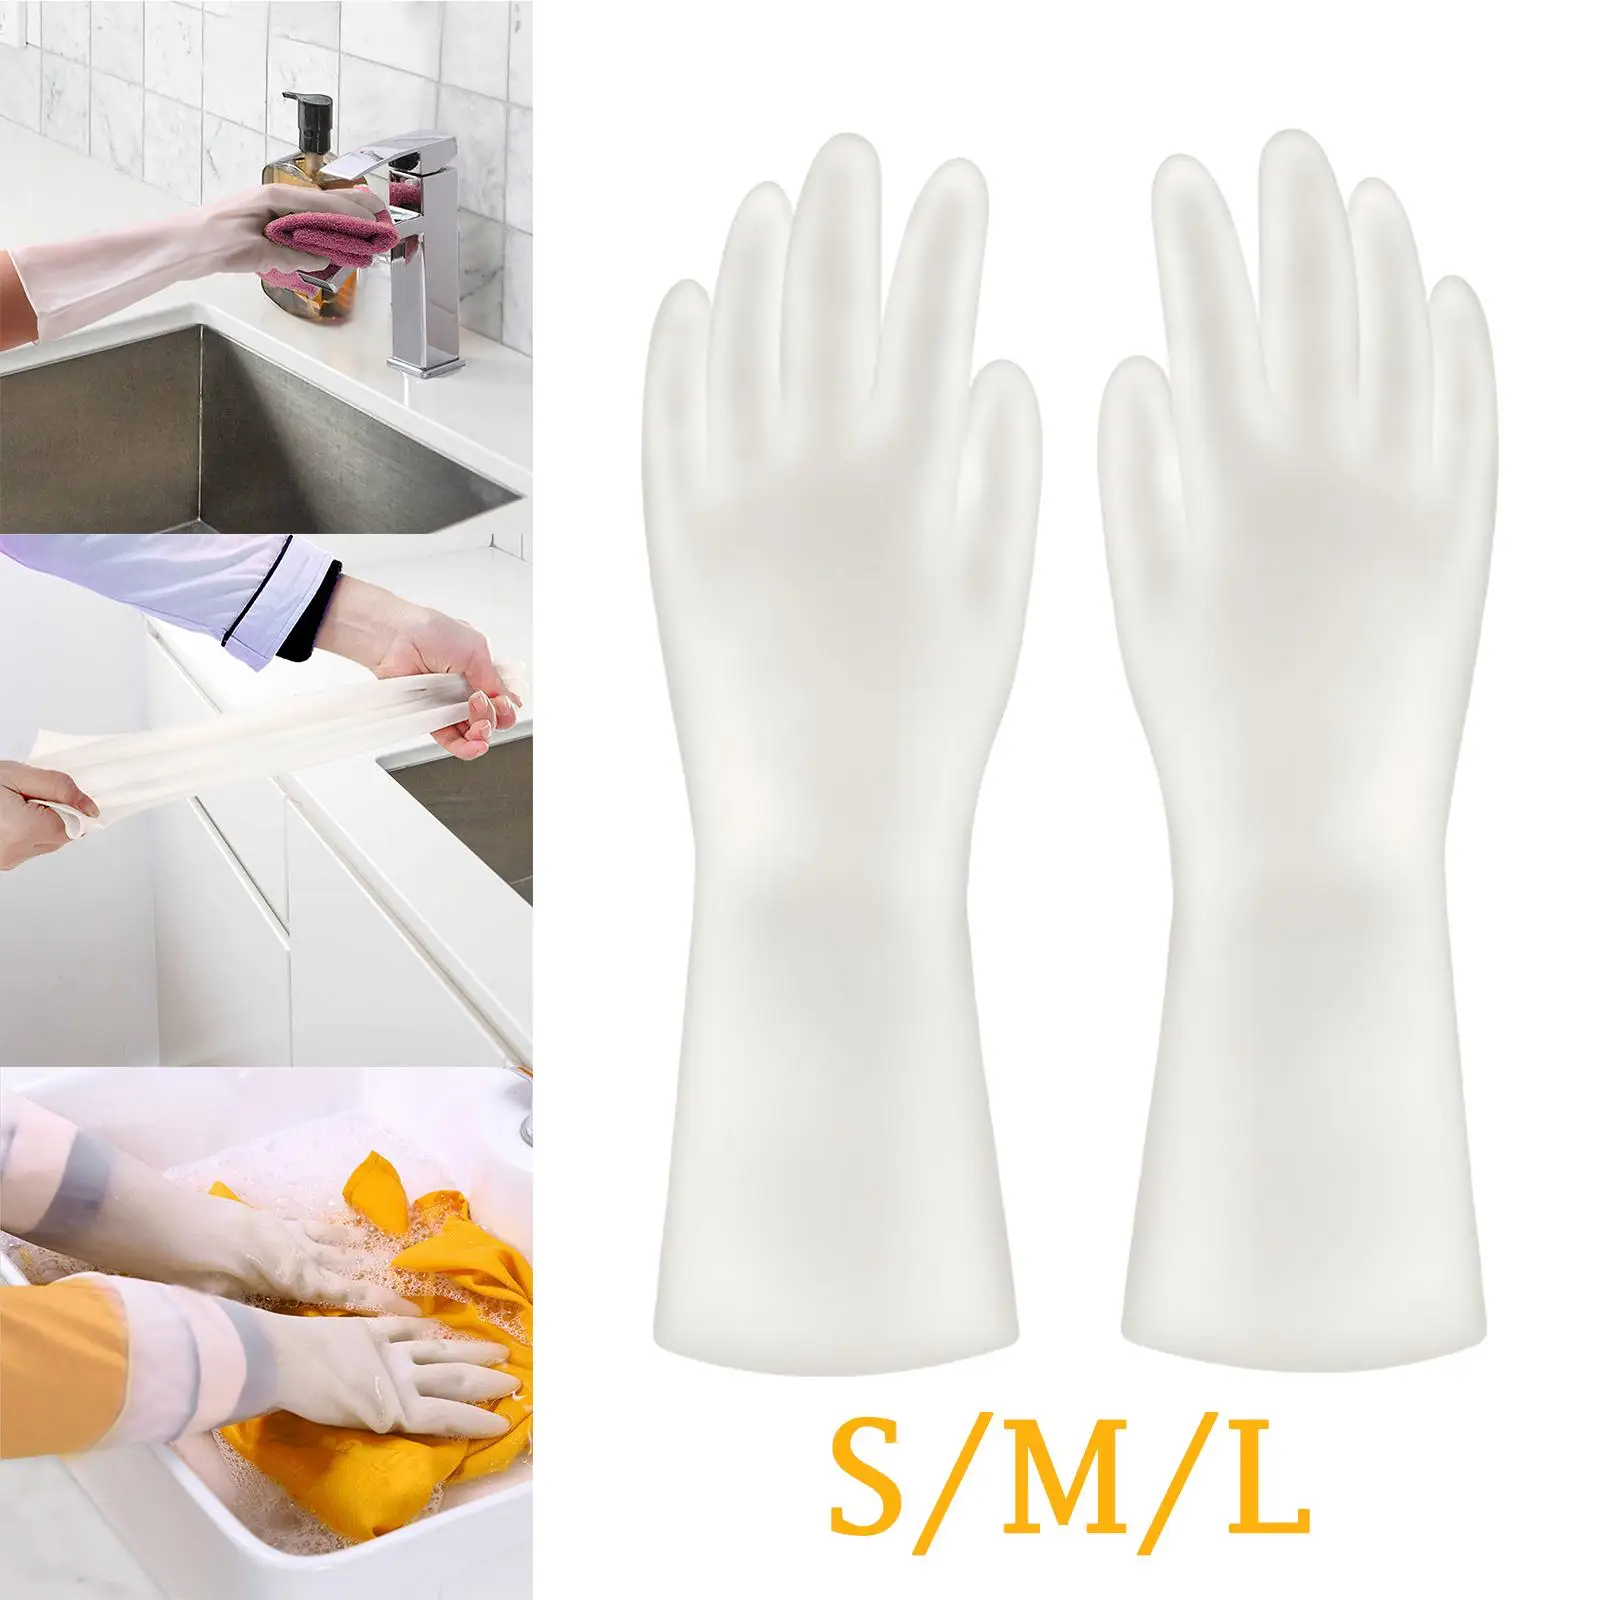 Reusable Household Gloves Non Slip Cleaning Housework Chores Gloves Washing Gloves for Gardening Clothes Washing Car Washing